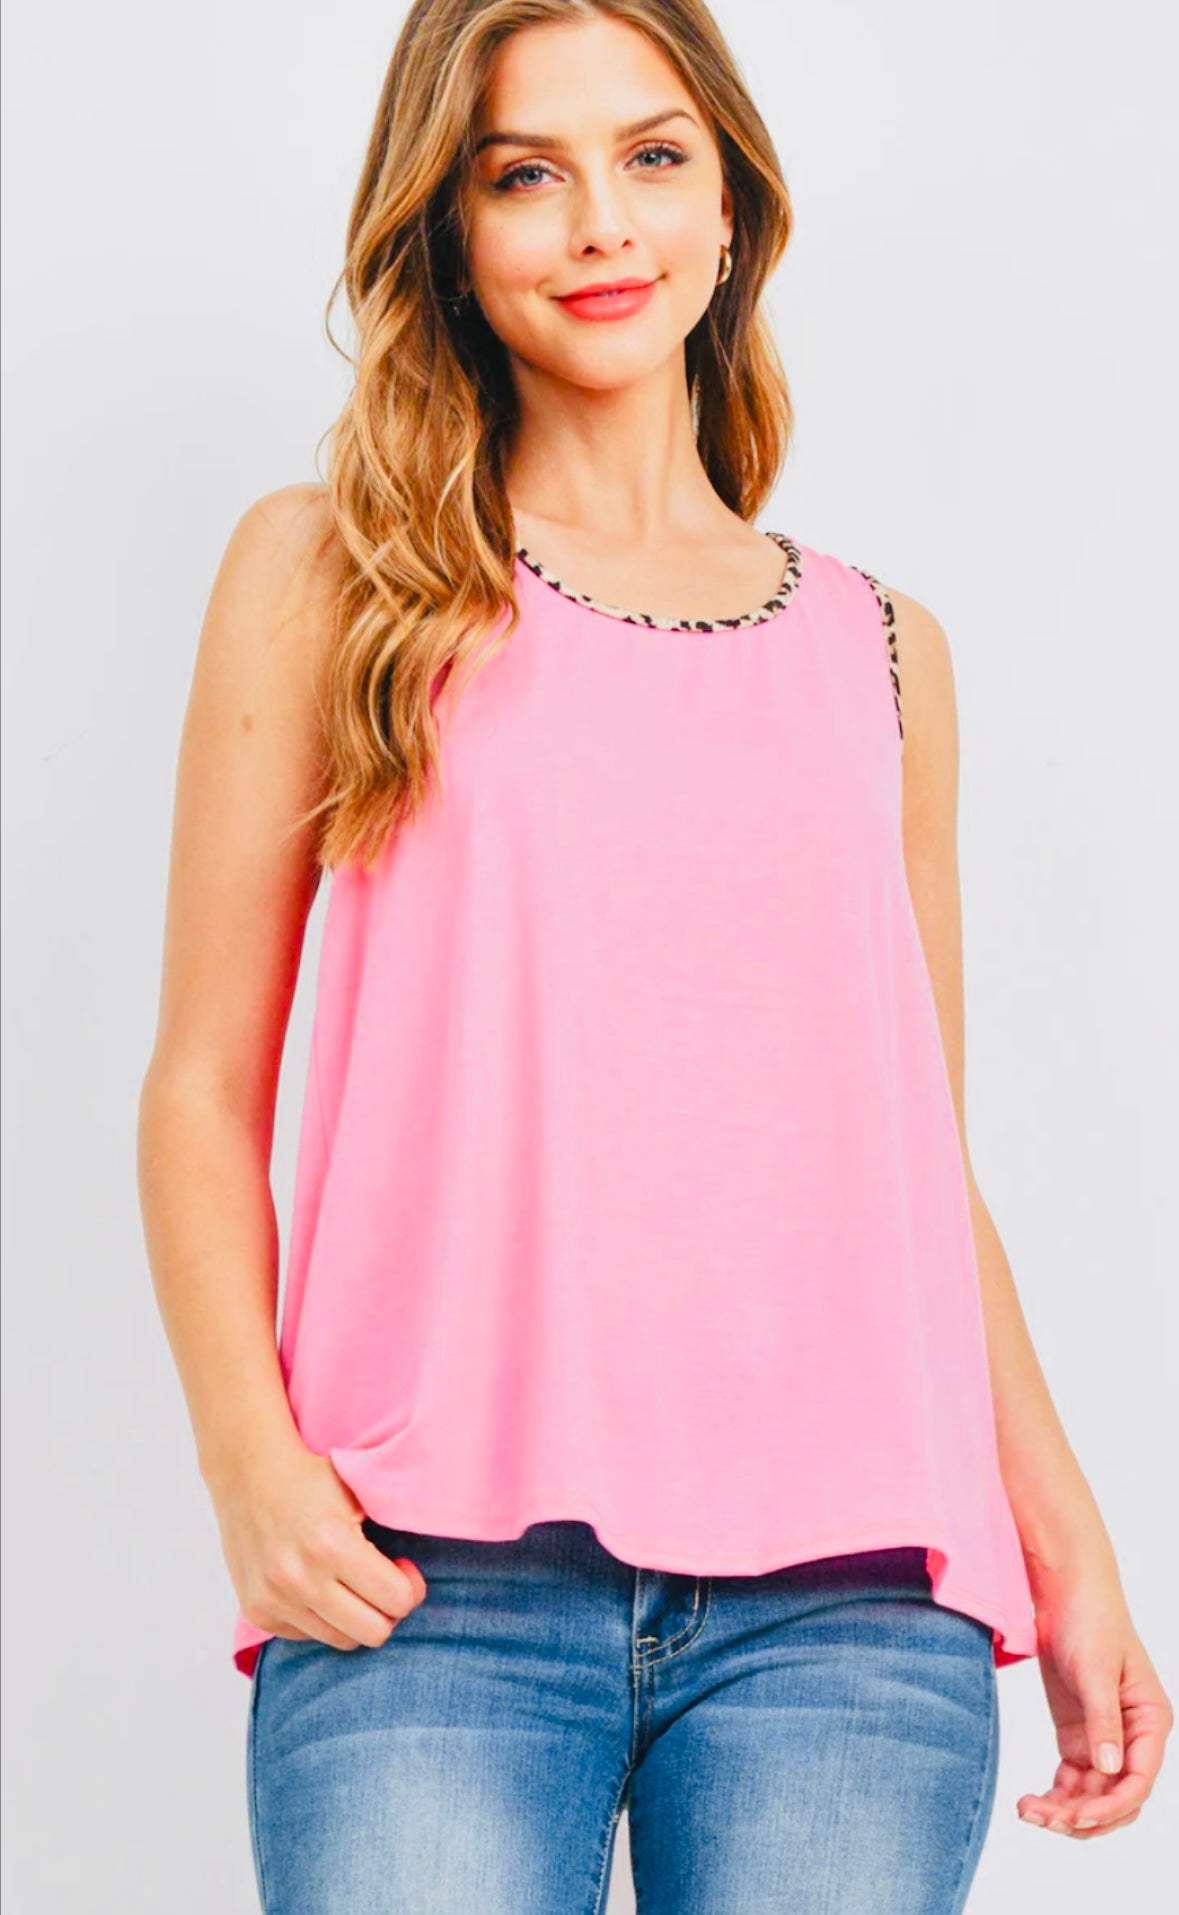 Baby Doll Pink Tank